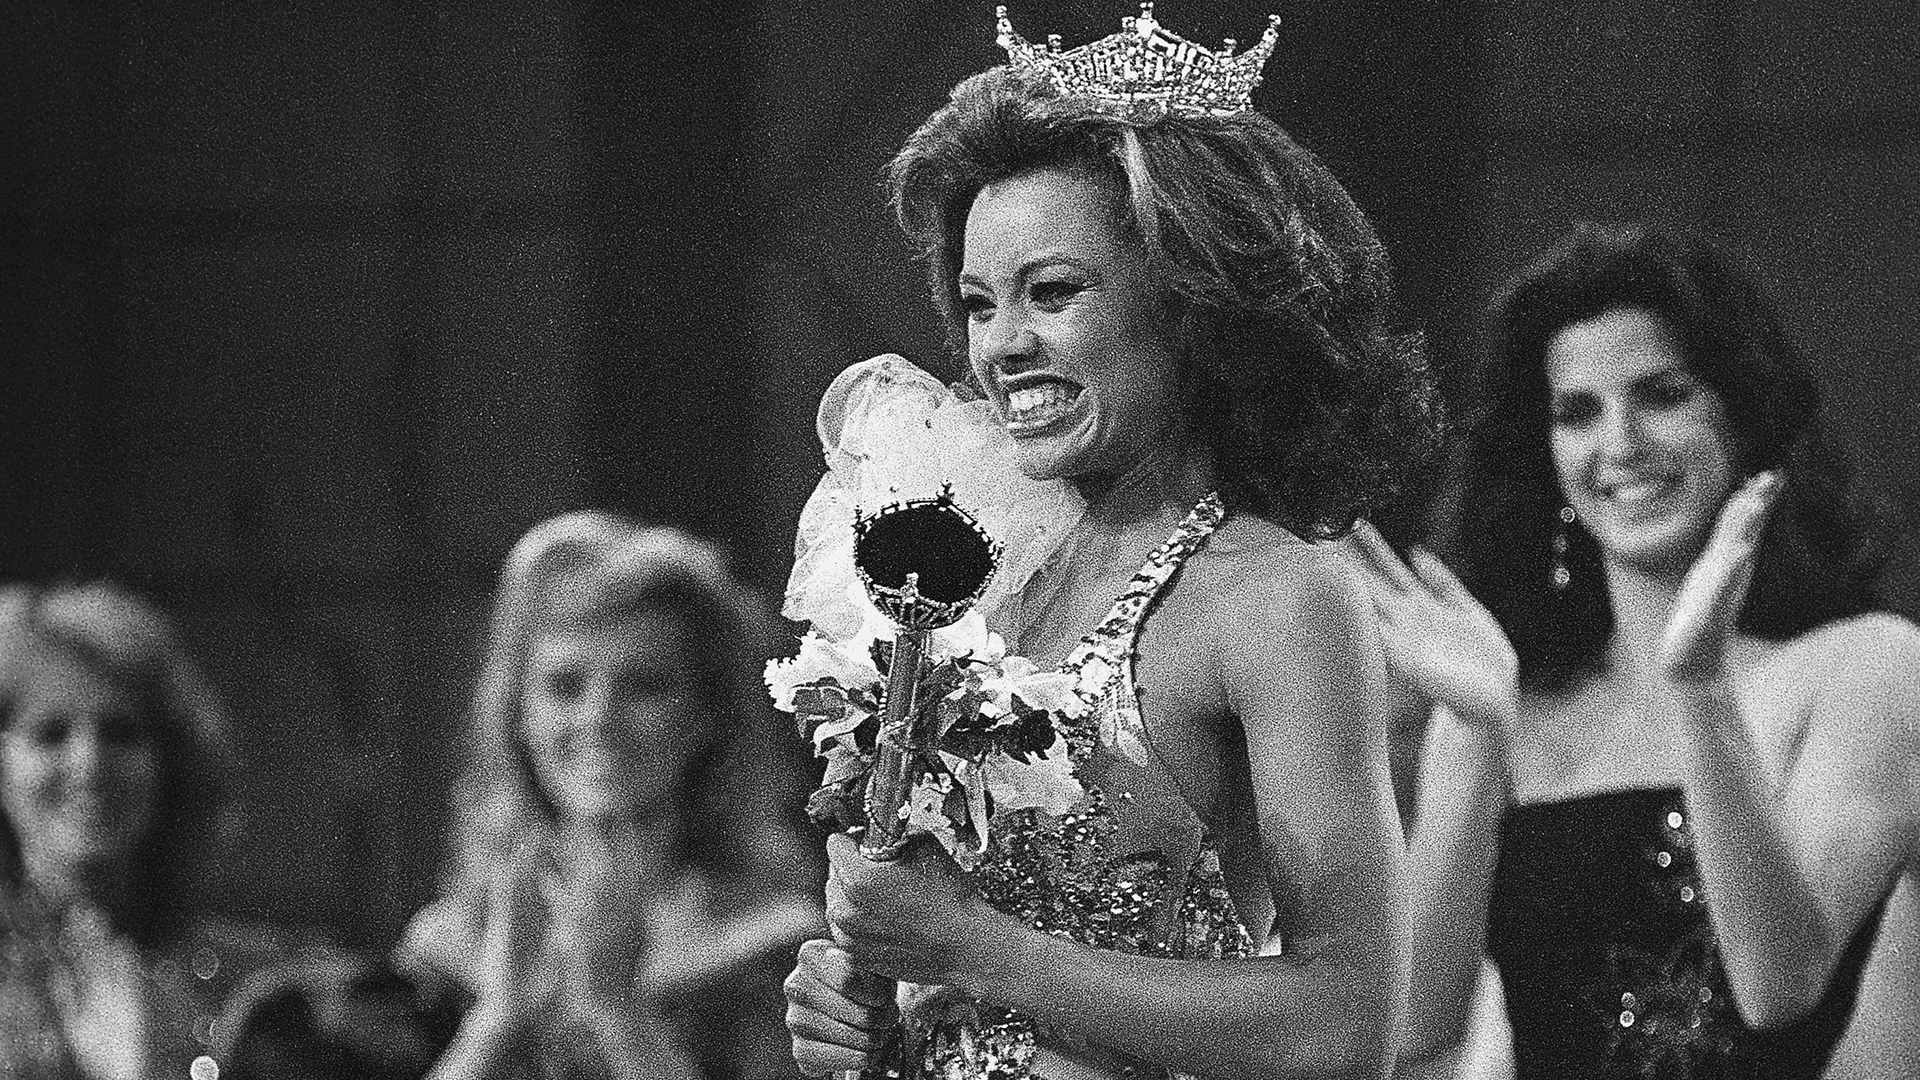 The Life Story Of Vanessa Williams - The Dark Side Beneath The Glistening Crown